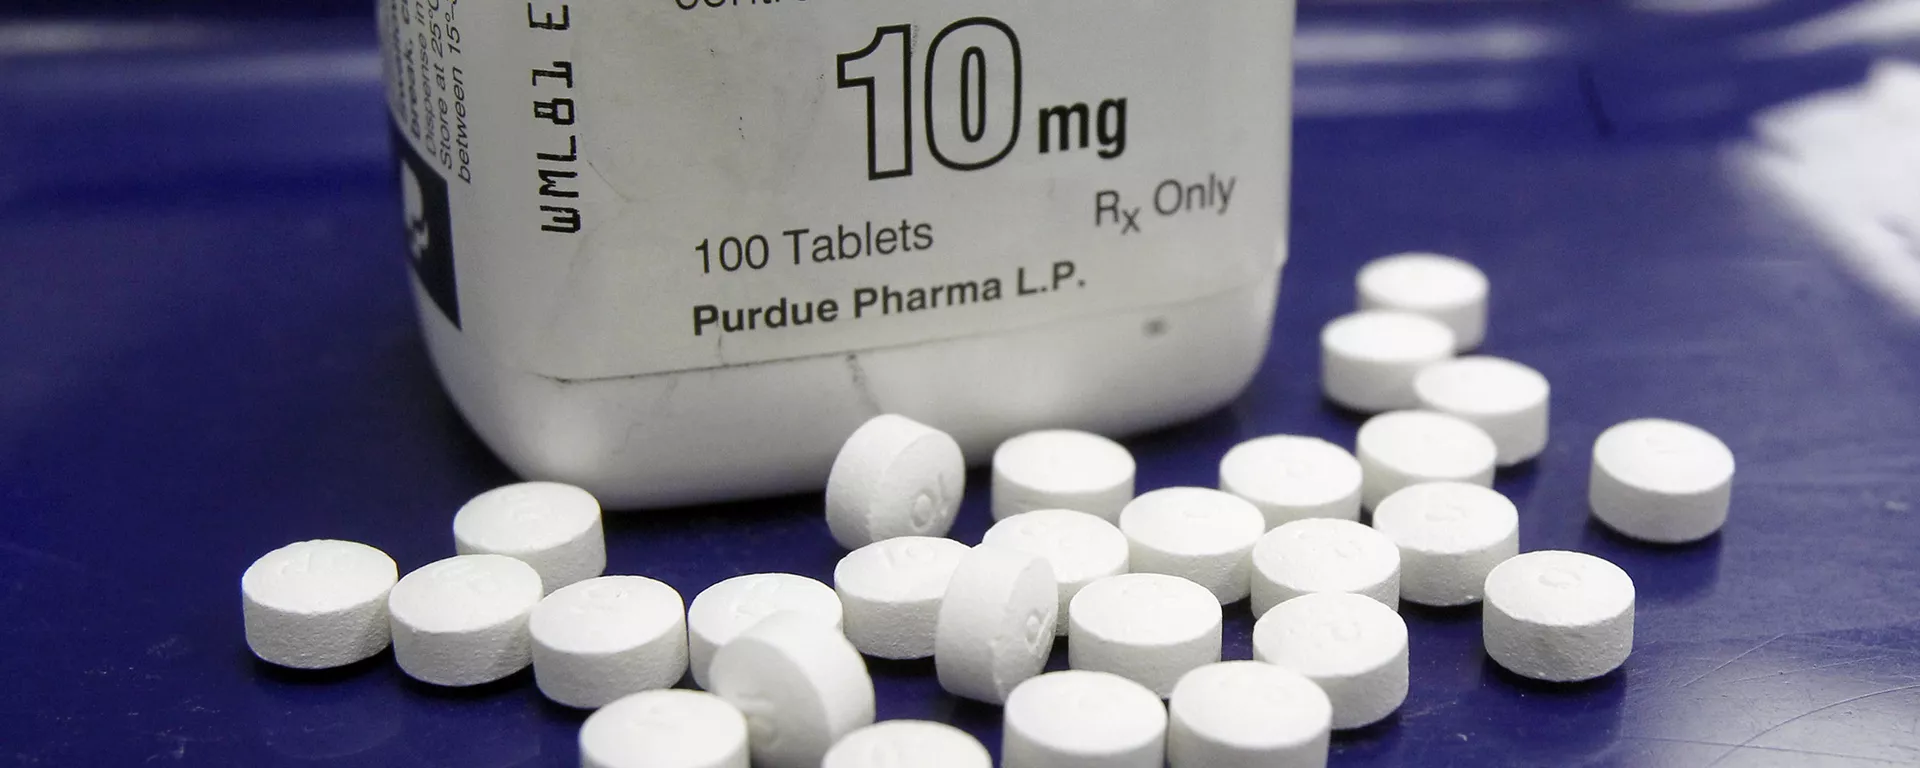 In Crosshairs of US Opioid Crisis: Secret Pharmacy Order Triggers Shortage of Xanax & Adderall